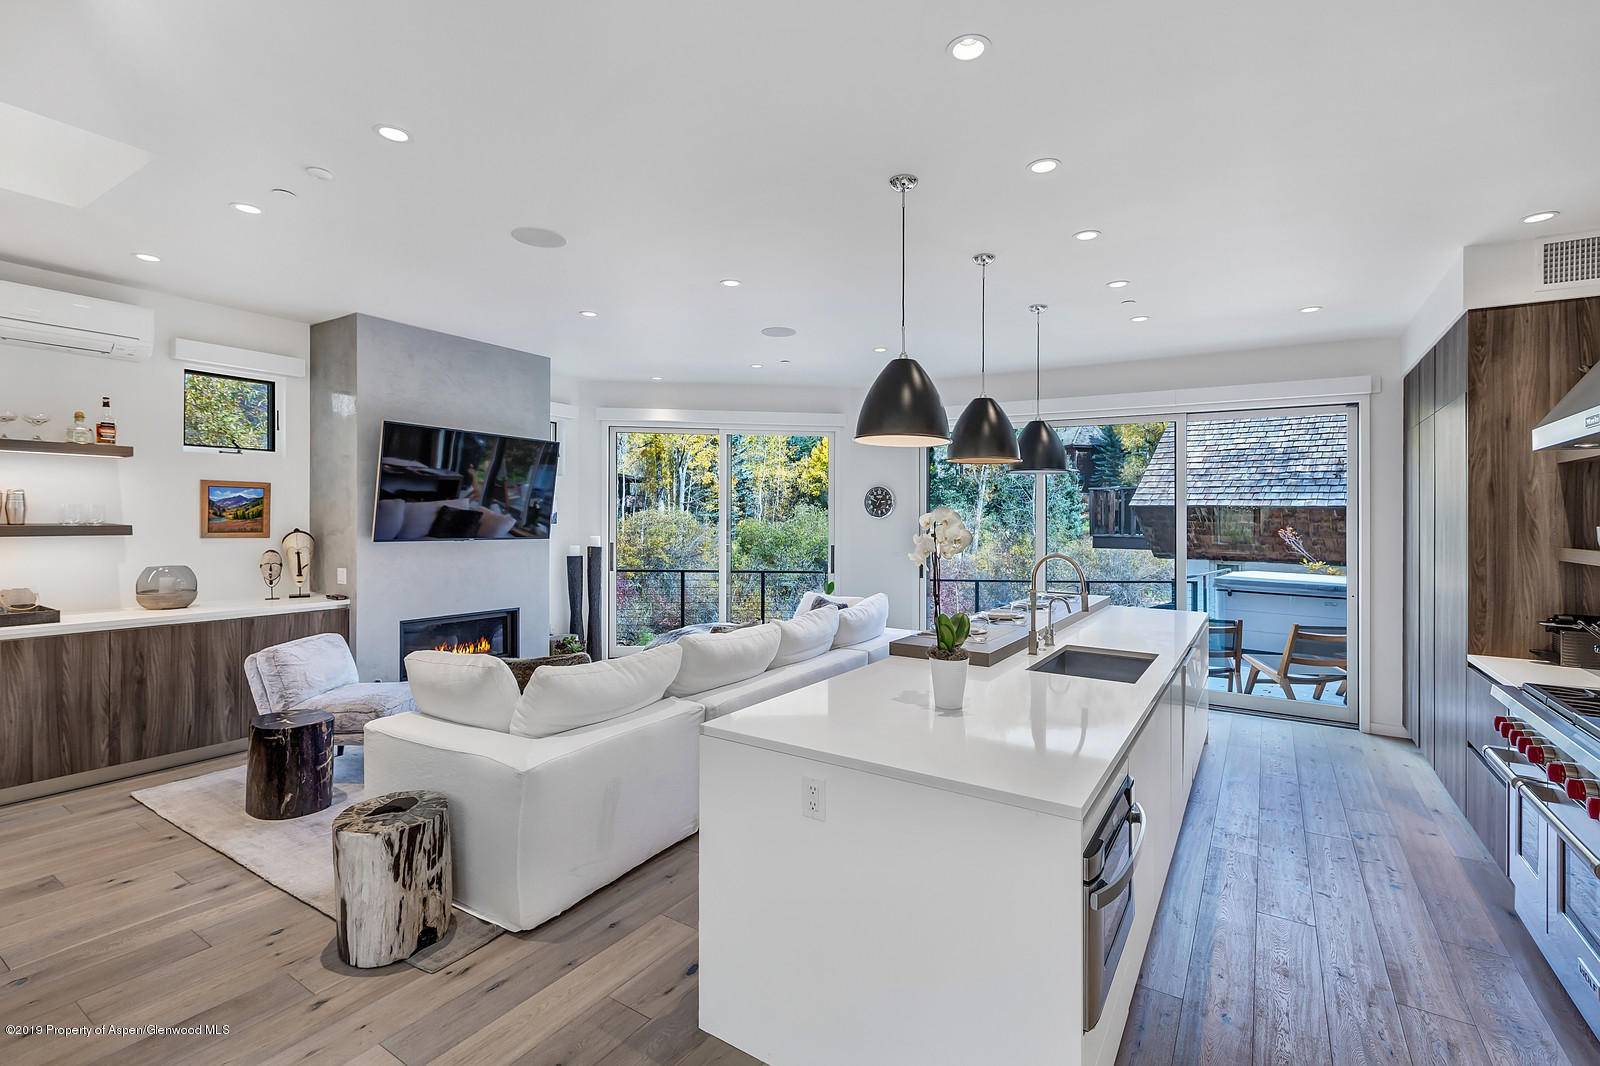 This beautiful Aspen ski home is conveniently located in Aspen's downtown core on a quiet cul de sac, only four blocks to the Silver Queen Gondola and world class dining ...